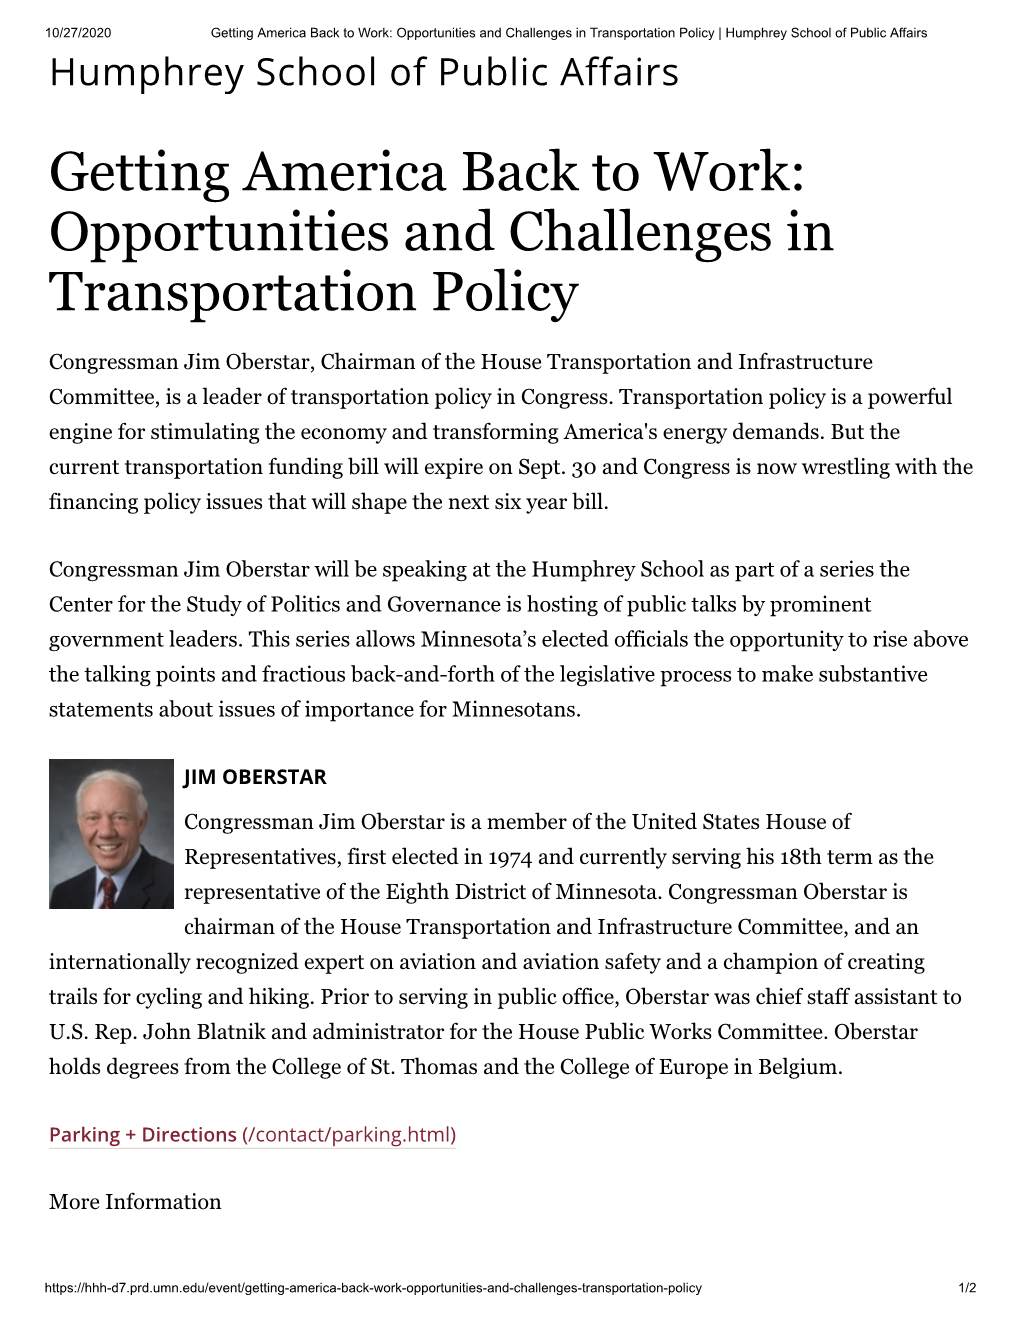 Getting America Back to Work: Opportunities and Challenges In